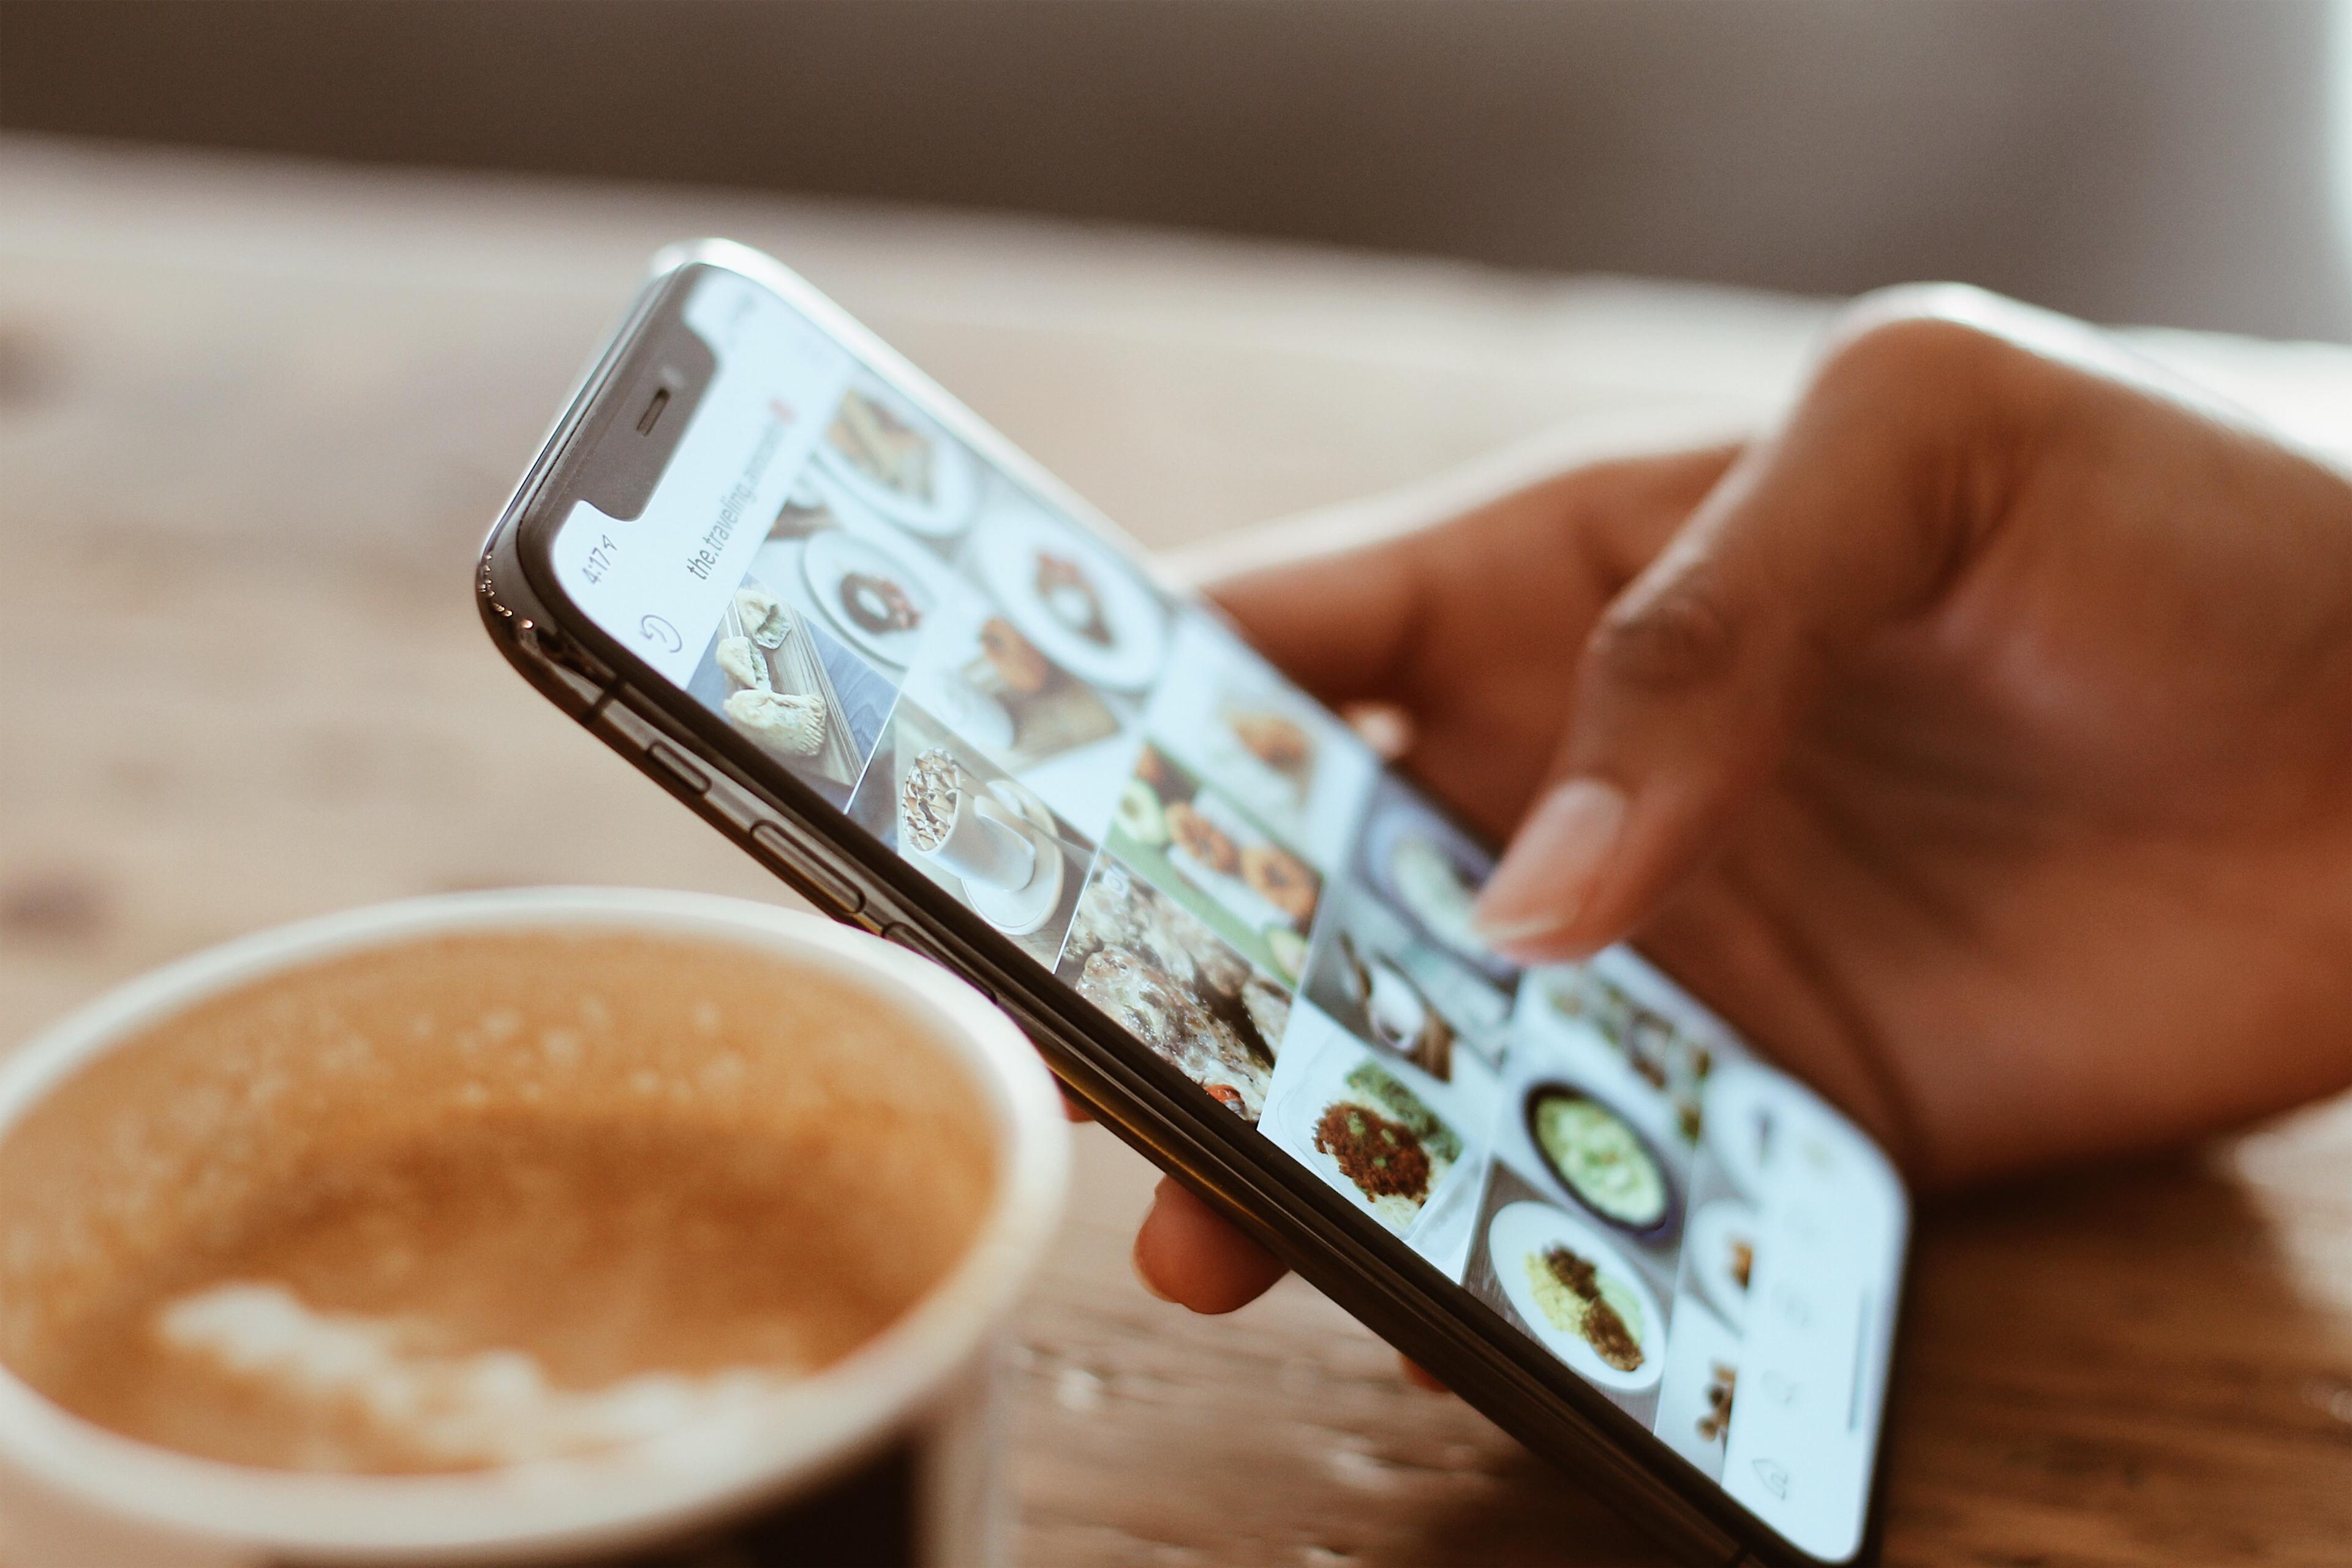 A hand scrolling social media on a smartphone, next to a cup of coffee